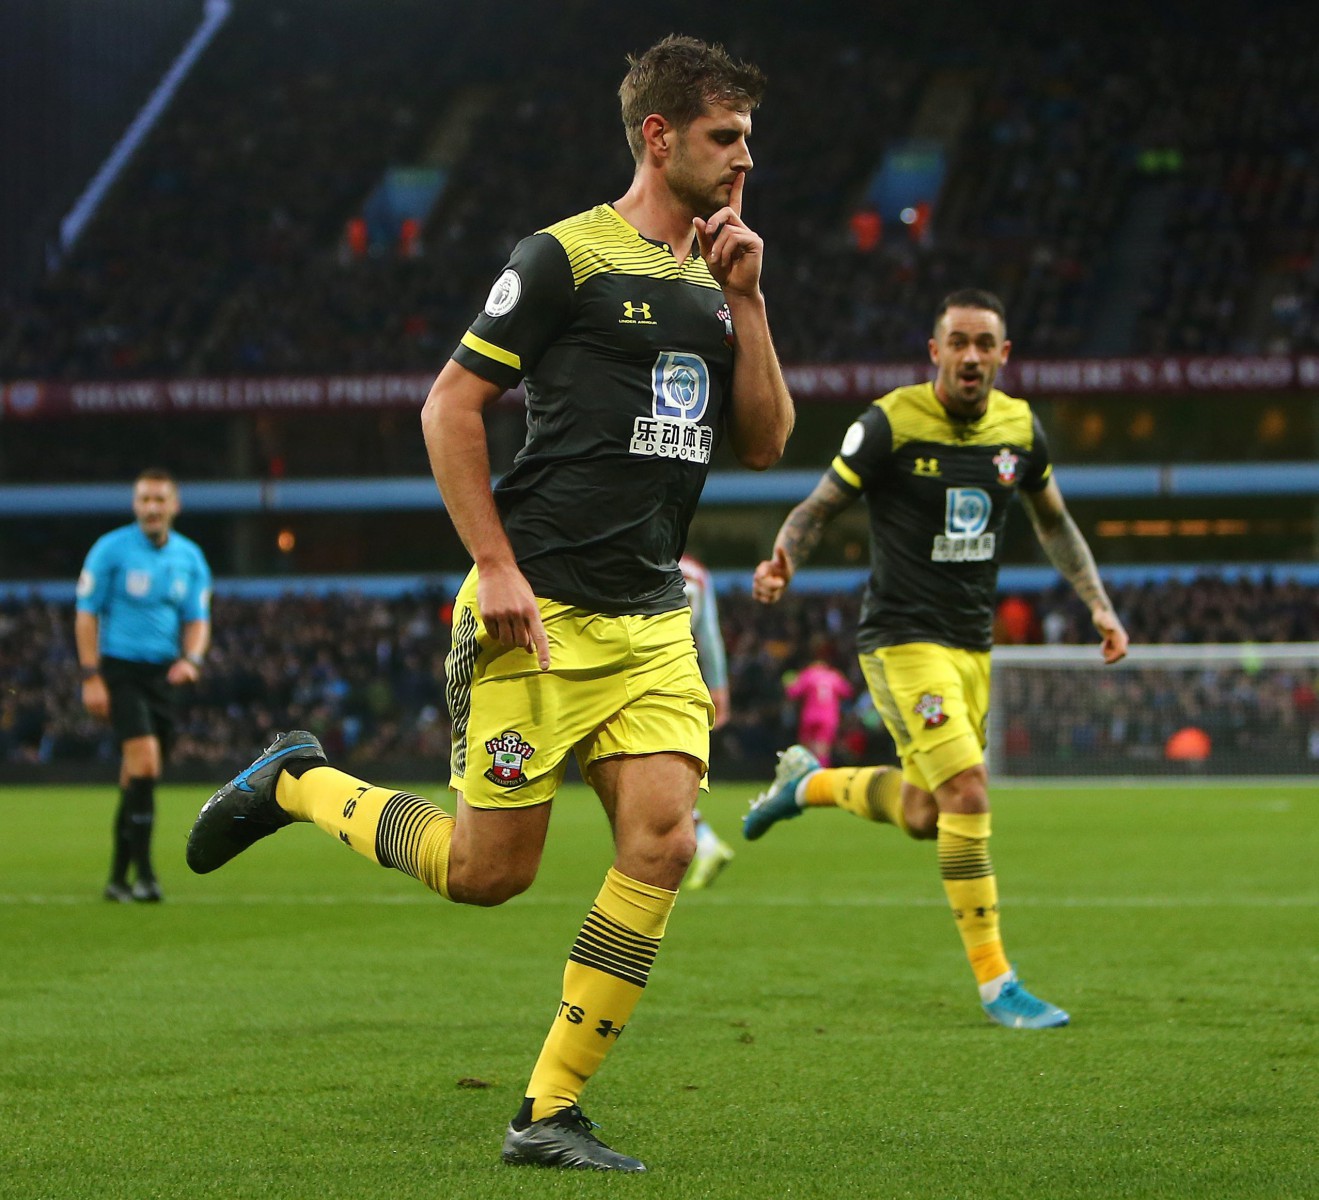 Jack Stephens had fired the visitors into a 2-0 lead to silence Villa Park